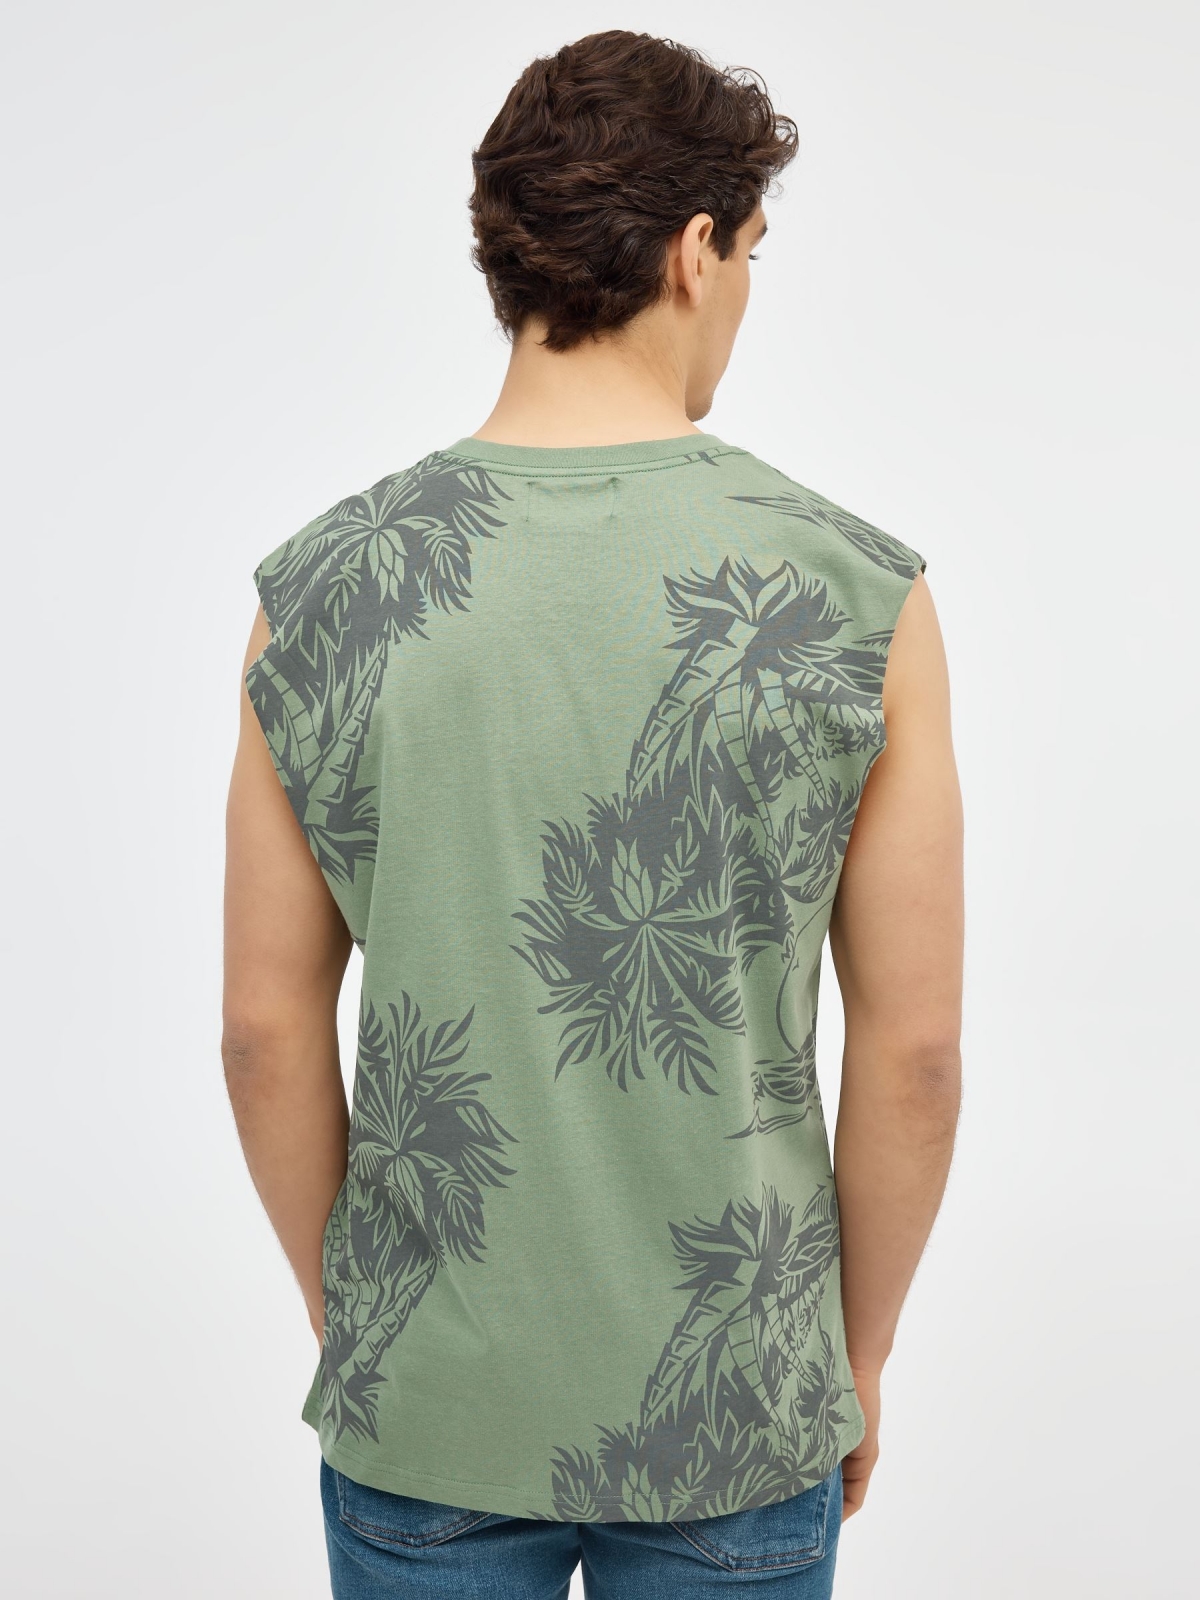 Sleeveless print t-shirt olive green middle back view